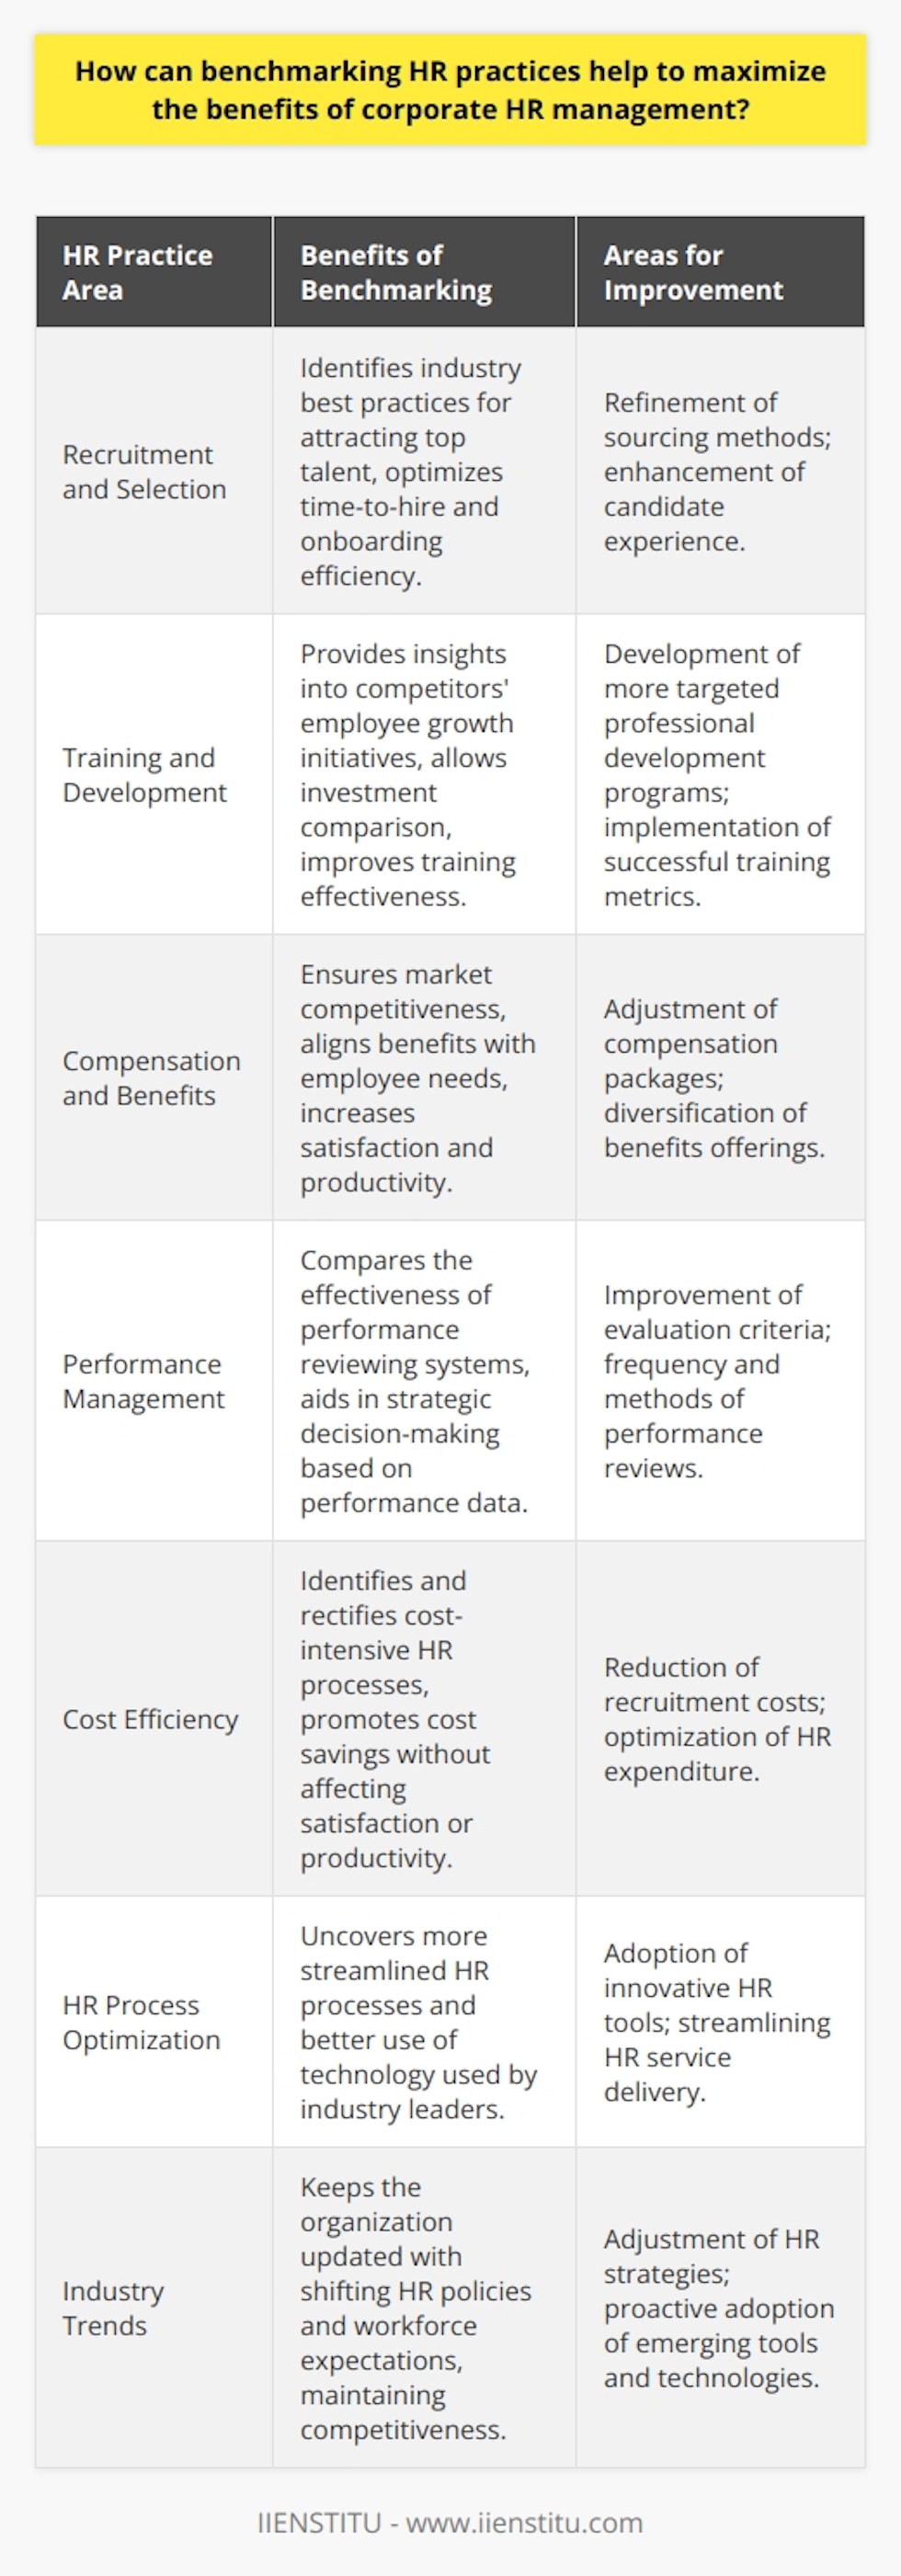 Benchmarking HR practices is a strategic approach that involves comparing an organization's human resource policies, practices, and performance to that of its competitors or industry leaders. The primary aim is to gain insights into areas of strength and opportunities for improvement. By leveraging benchmarking, companies can discover how well their HR functions are performing in comparison to others and use this information to enhance their HR management.One of the main advantages of HR benchmarking is the ability to identify best practices in recruitment and selection. Organizations can evaluate key aspects such as sourcing methods, time-to-hire, and the effectiveness of their onboarding process. This comparative analysis can reveal tactics used by top performers in the industry, which can be adapted to refine the recruitment strategy, thereby attracting top talent more effectively.In the realm of training and development, benchmarking can shine a light on how competitors or industry leaders approach employee growth and skill enhancement. Understanding how much of an investment others make in cultivating their workforce, and the methods used to measure the success of training programs, can guide an organization in designing more effective and efficient professional development initiatives.Compensation and benefits is another crucial area where benchmarking is invaluable. It allows a company to ensure salaries and benefits packages are competitive, which is fundamental in both retaining high-caliber employees and recruiting new ones. Benchmarking assists in analyzing market compensation rates, the variety of benefits offered, and the overall satisfaction of employees with their compensation and benefits, which affects employee engagement and productivity.Performance management systems can also be enhanced through HR benchmarking. It helps companies see how their processes for evaluating and improving employee performance stack up against others. This can include the frequency and methodology of performance reviews, the criteria used for appraisals, and how performance data is utilized to make strategic decisions.Furthermore, benchmarking can uncover opportunities for cost savings without undermining employee satisfaction or productivity. For instance, if a company's cost per hire is significantly higher than the benchmark, it could indicate inefficiencies in the recruitment process or an over-reliance on high-cost sourcing channels.Adapting HR resources for maximum efficiency is another vital outcome of benchmarking. An organization may find that leading competitors have more streamlined HR processes or make better use of technology, which could inspire process improvements or the adoption of innovative HR tools, leading to more competent HR service delivery.Lastly, staying abreast of industry trends is essential for the continuous evolution of HR practices. Through benchmarking, organizations can identify shifts in HR policies, emerging tools and technologies, and changing workforce expectations. This allows companies to stay competitive by proactively adjusting their HR strategies to match evolving industry norms.In essence, benchmarking HR practices is a comprehensive tool that not only compares quantitative data but also provides qualitative insights into how to maximize corporate HR's effectiveness. When executed well, benchmarking can lead to significant strategic gains, including enhanced recruitment processes, more robust employee development, competitive compensation packages, and improved overall workforce management, which collectively contribute to the organization’s competitive advantage and bottom-line success.